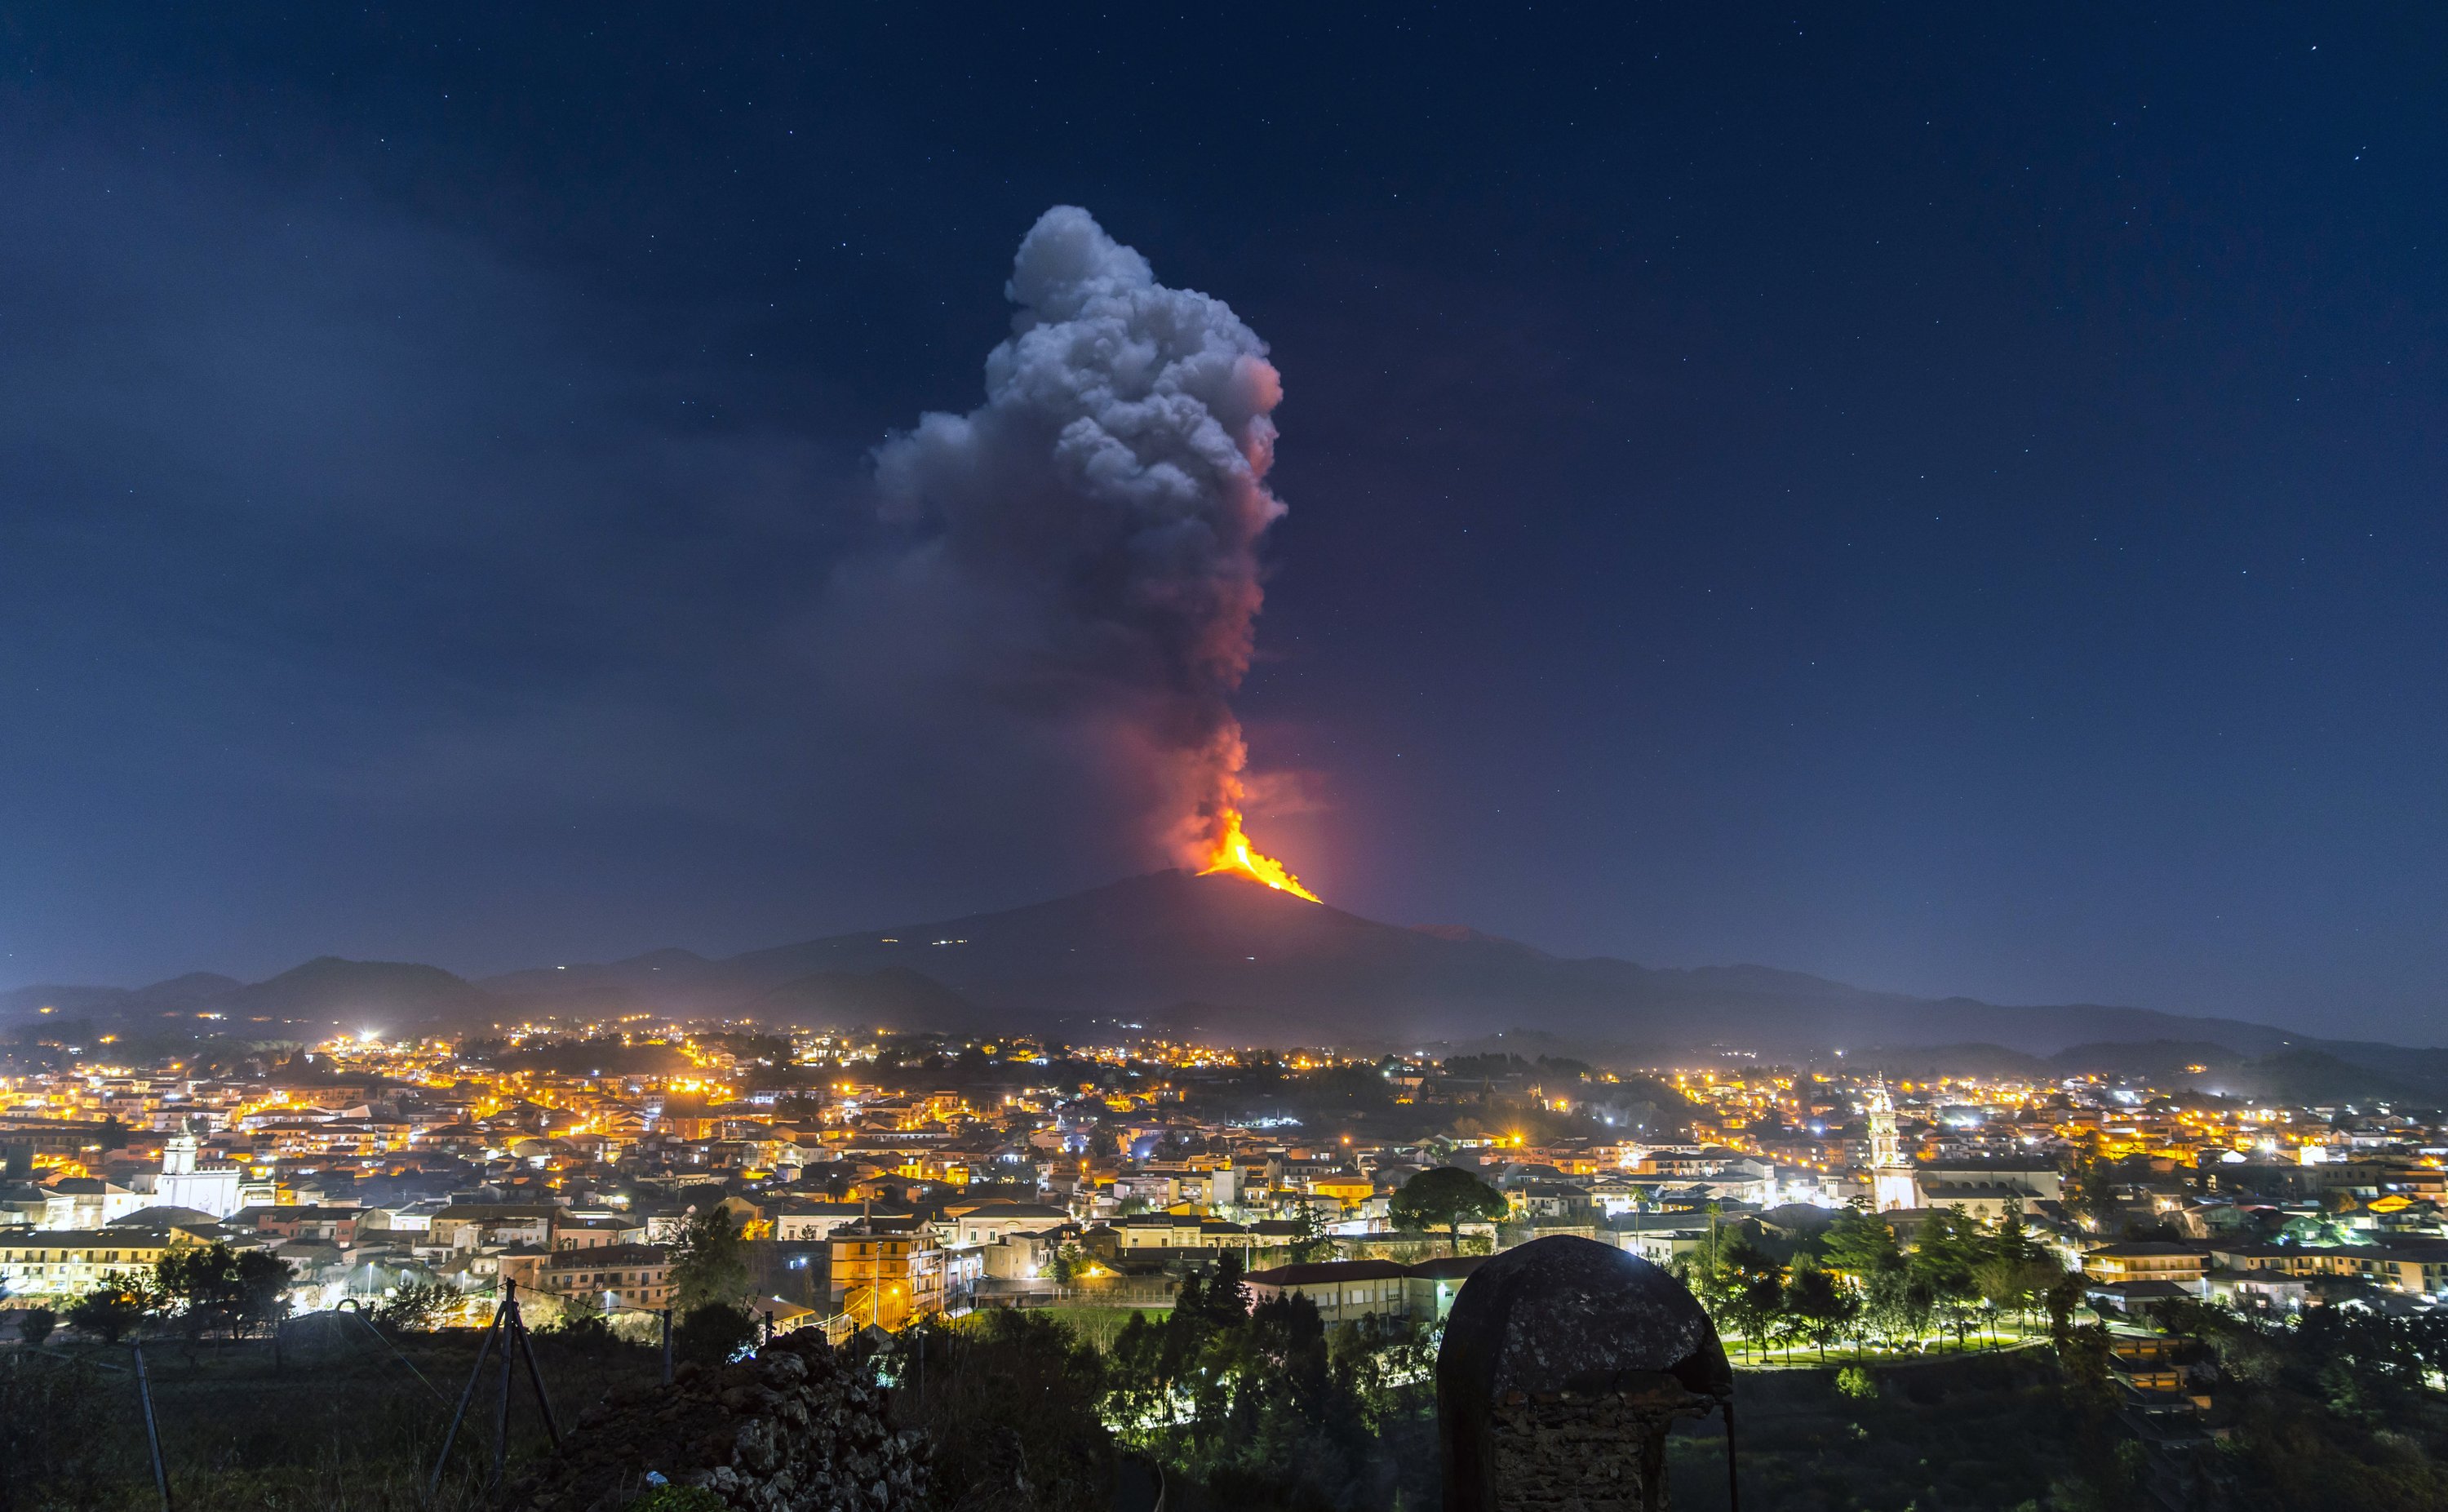 Mount Etna offers its latest spectacular show